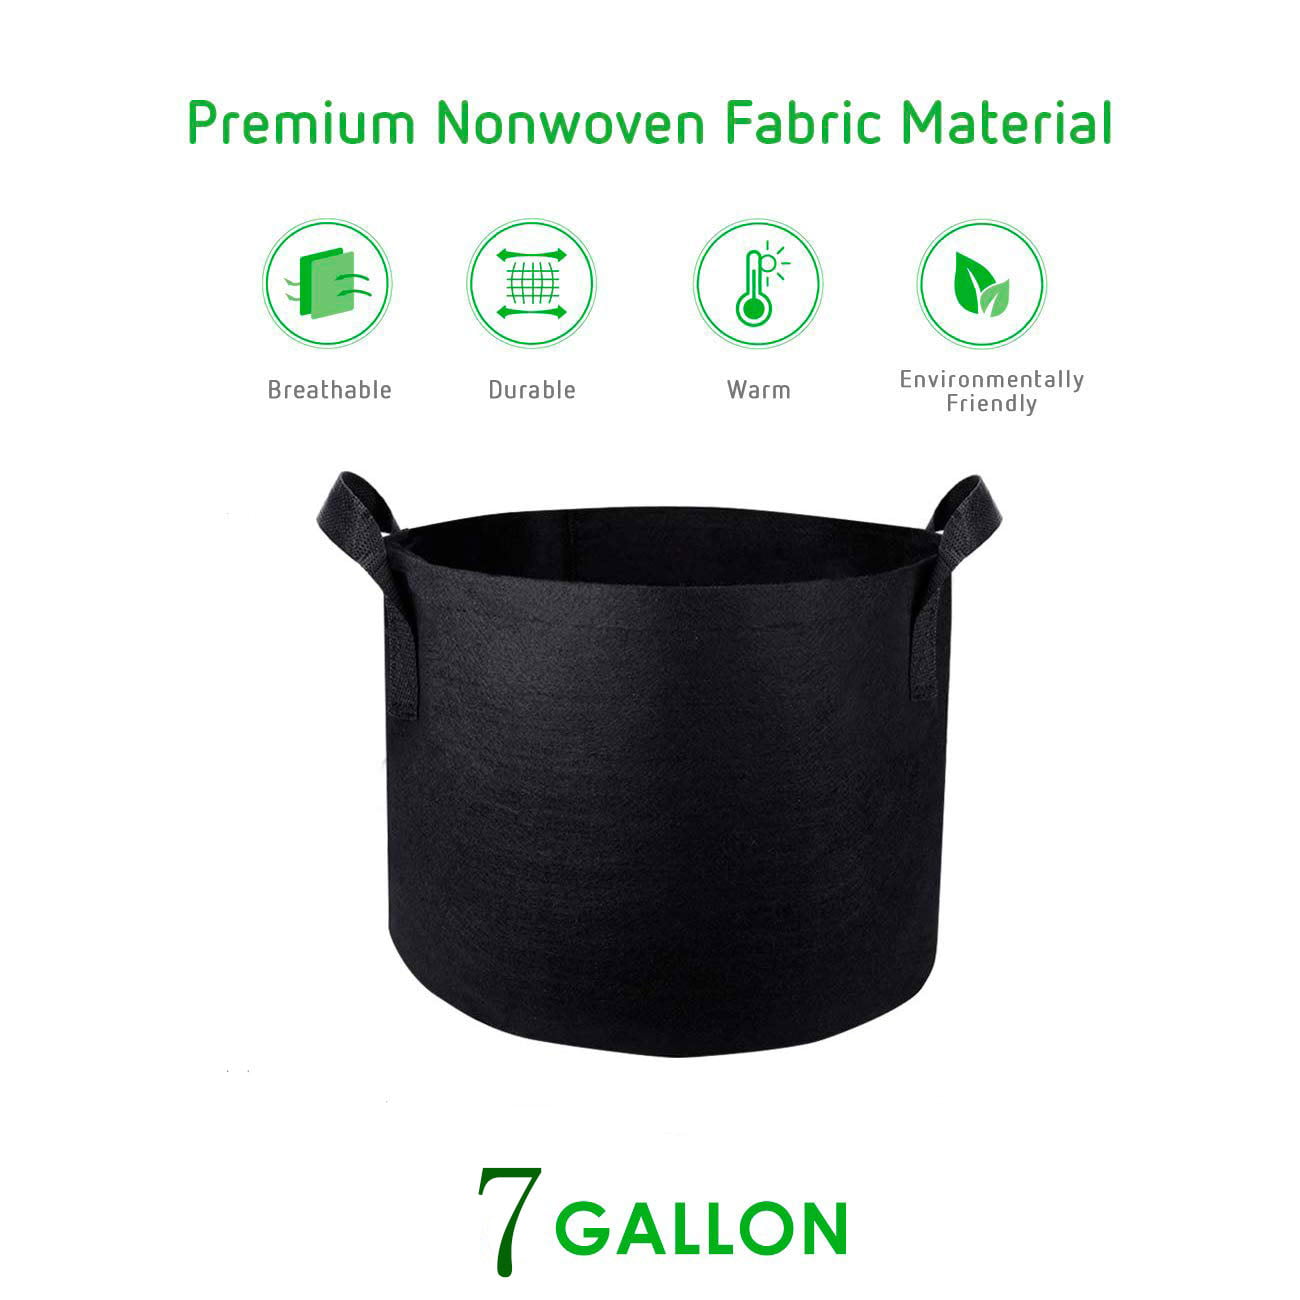 Black 2 Pack Grow Bags 7 Gallon Vegetables/Flower/Plants Growing Bag Nonwoven Heavy Duty Aeration Fabrick Pots with Handles 